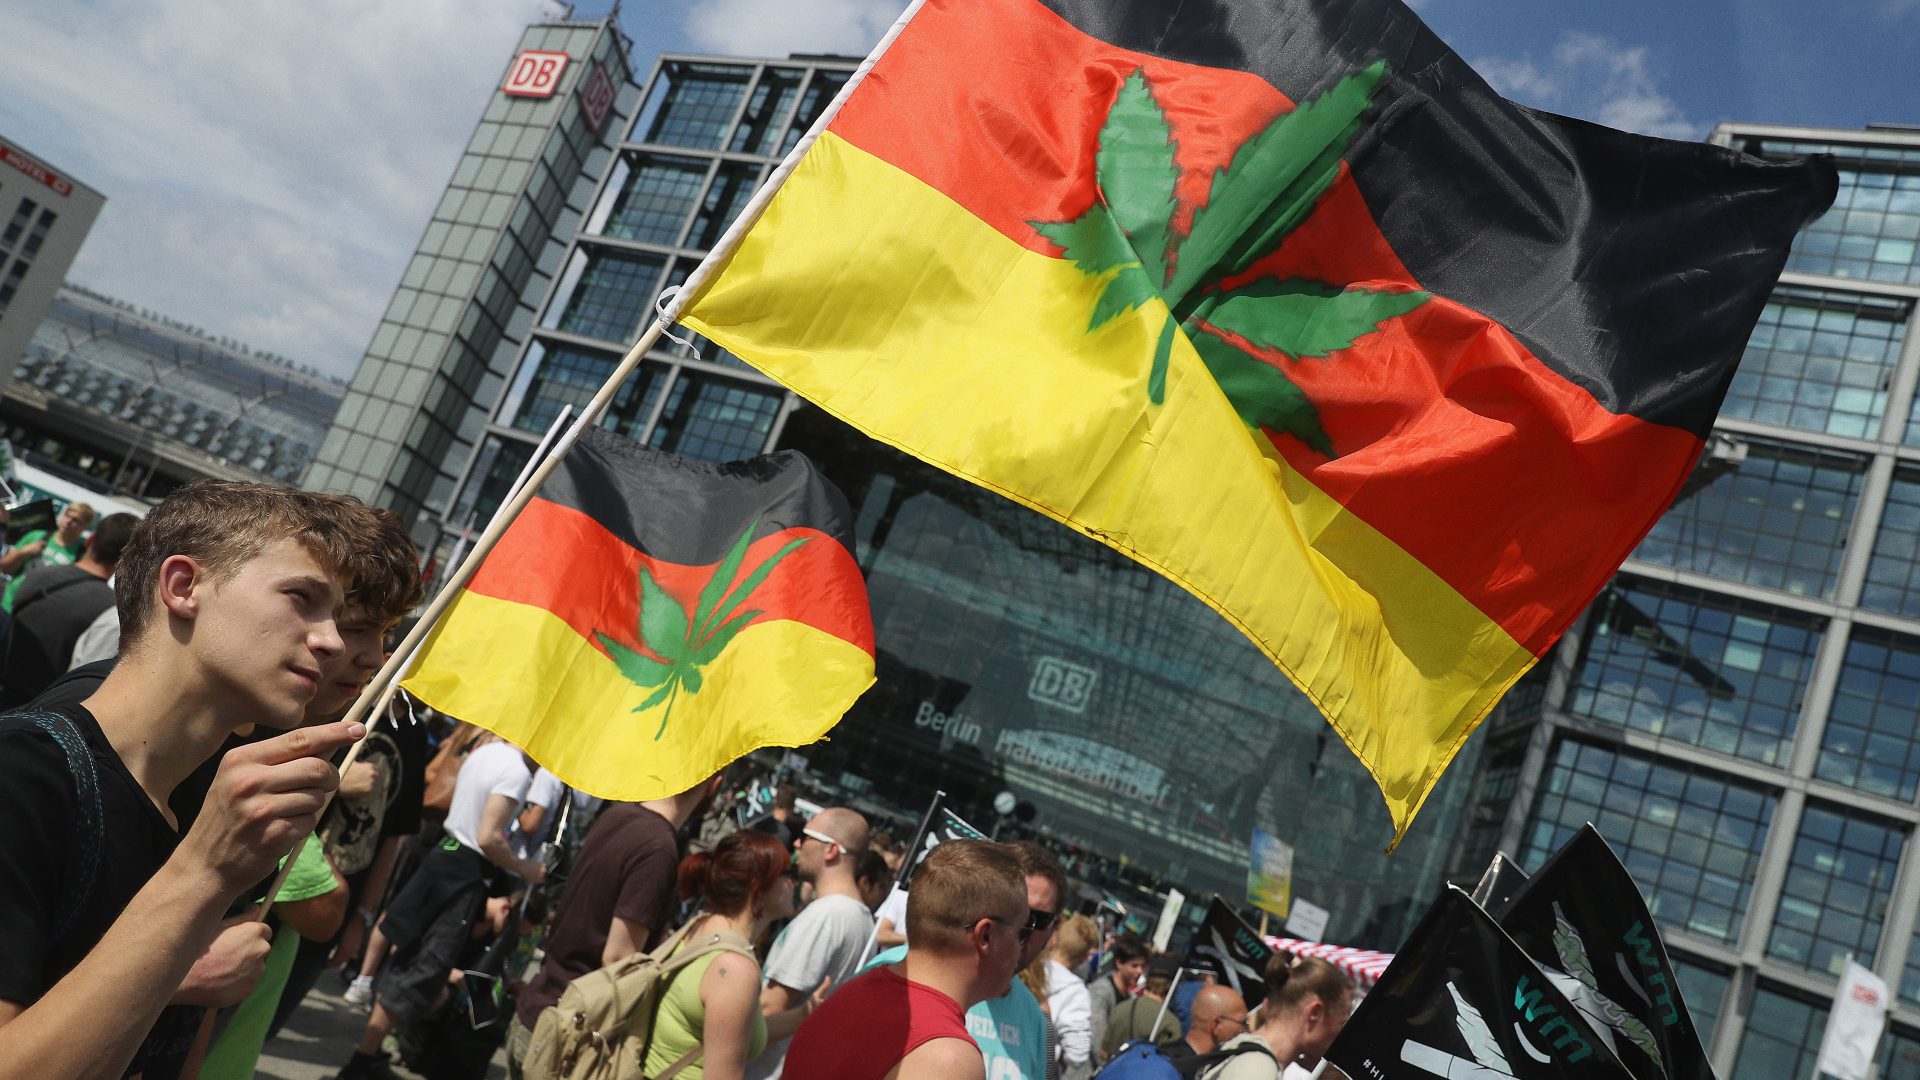 At Berlin’s annual Hemp Parade people call for the legalisation of cannabis. Photo: Sean Gallup/Getty Images